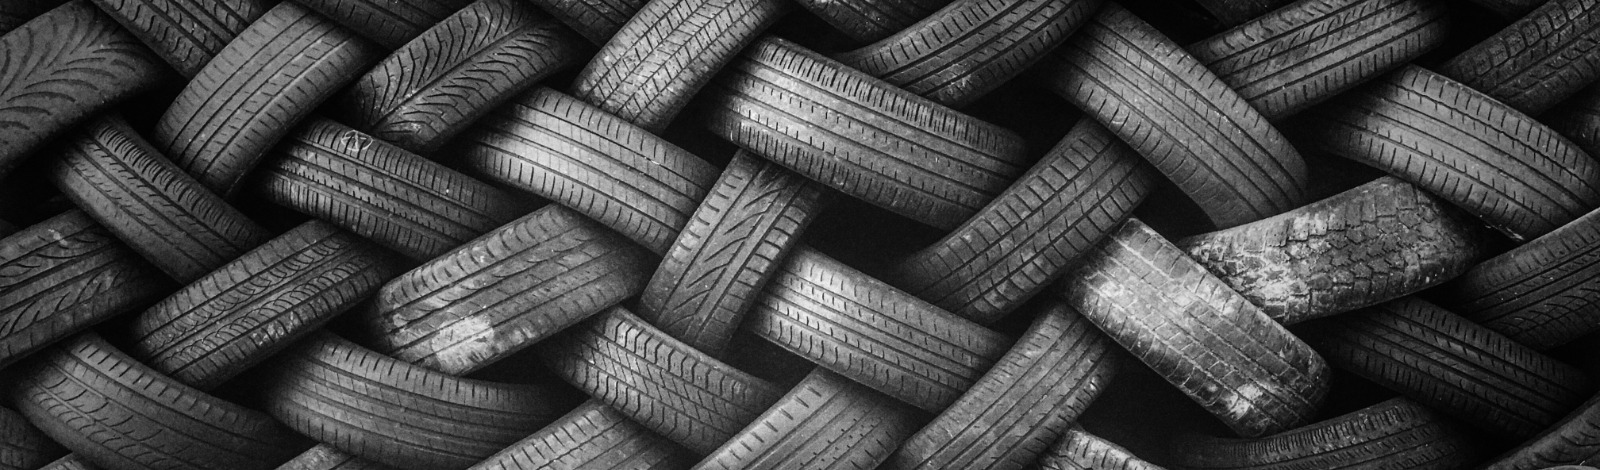 used tires stacked in a herringbone pattern